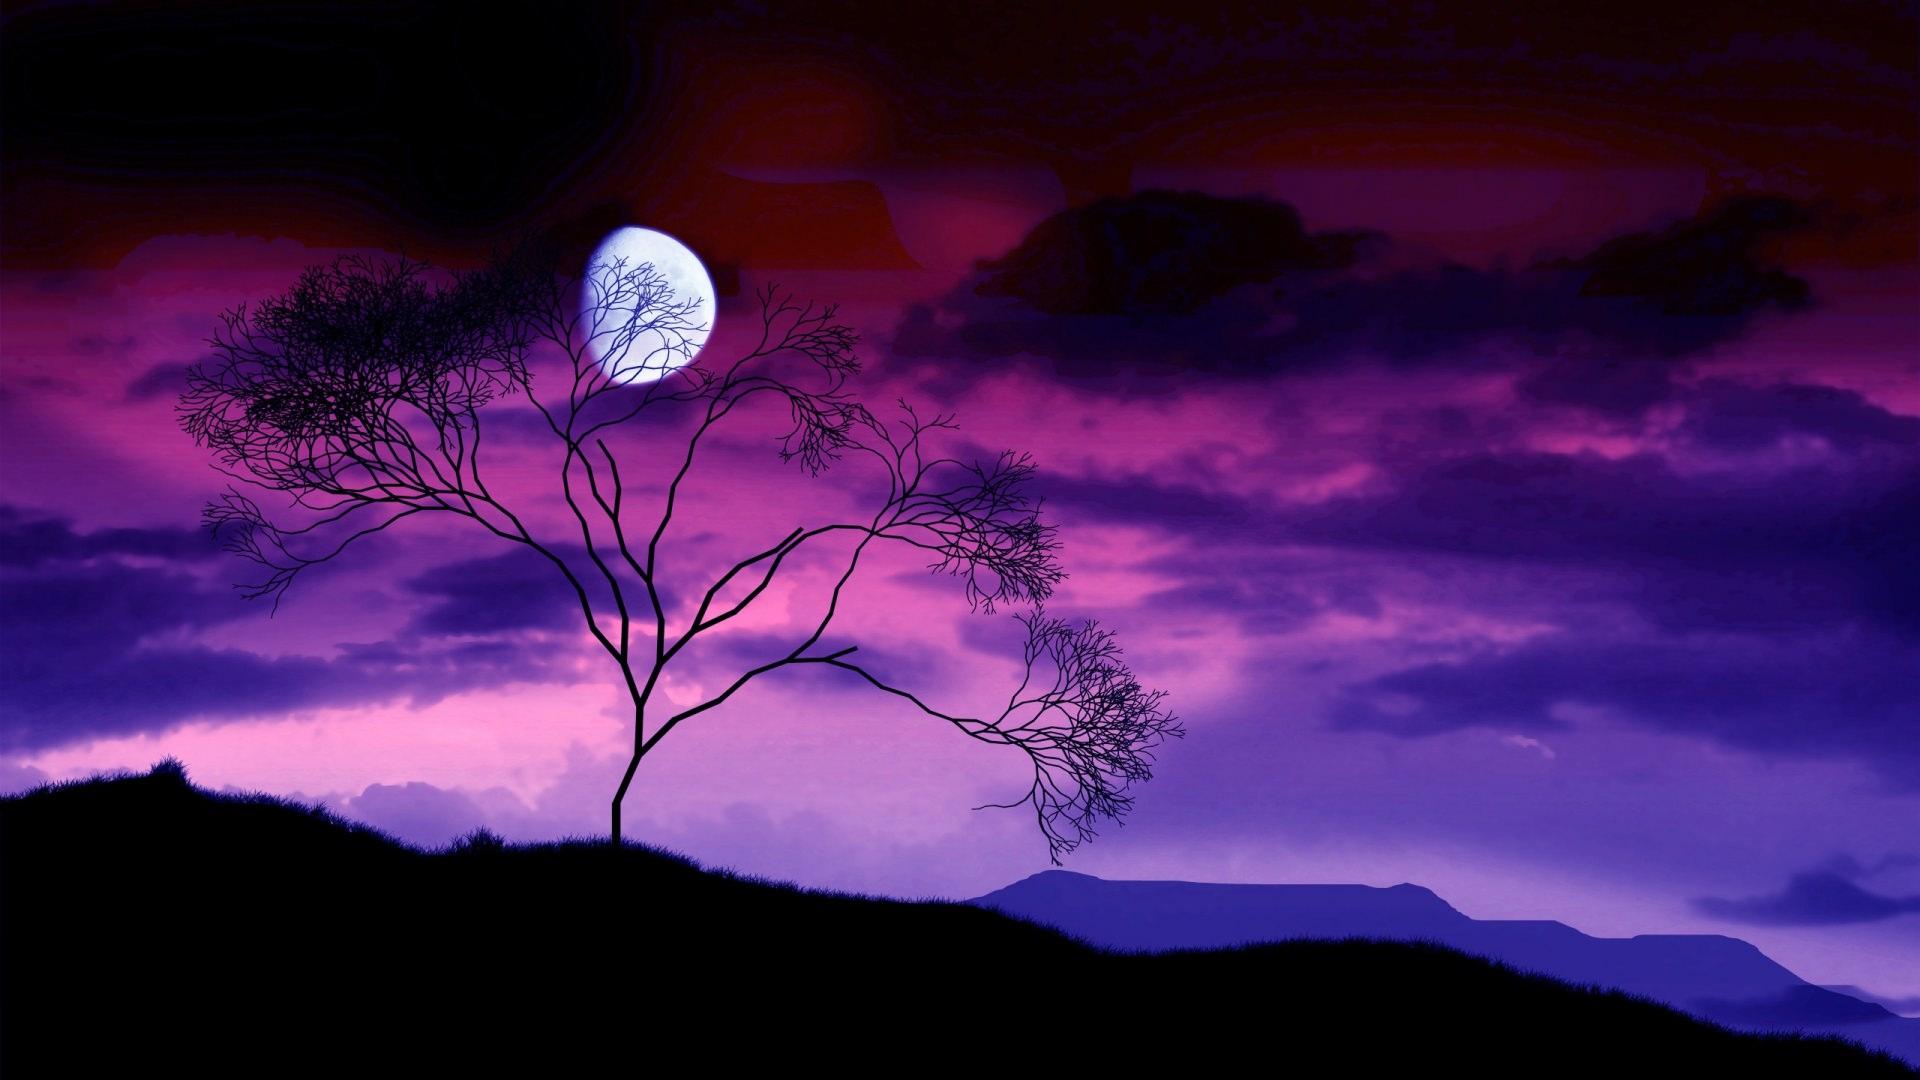 Blue Night And Moon Nature HD Wallpaper 1920 × 1080